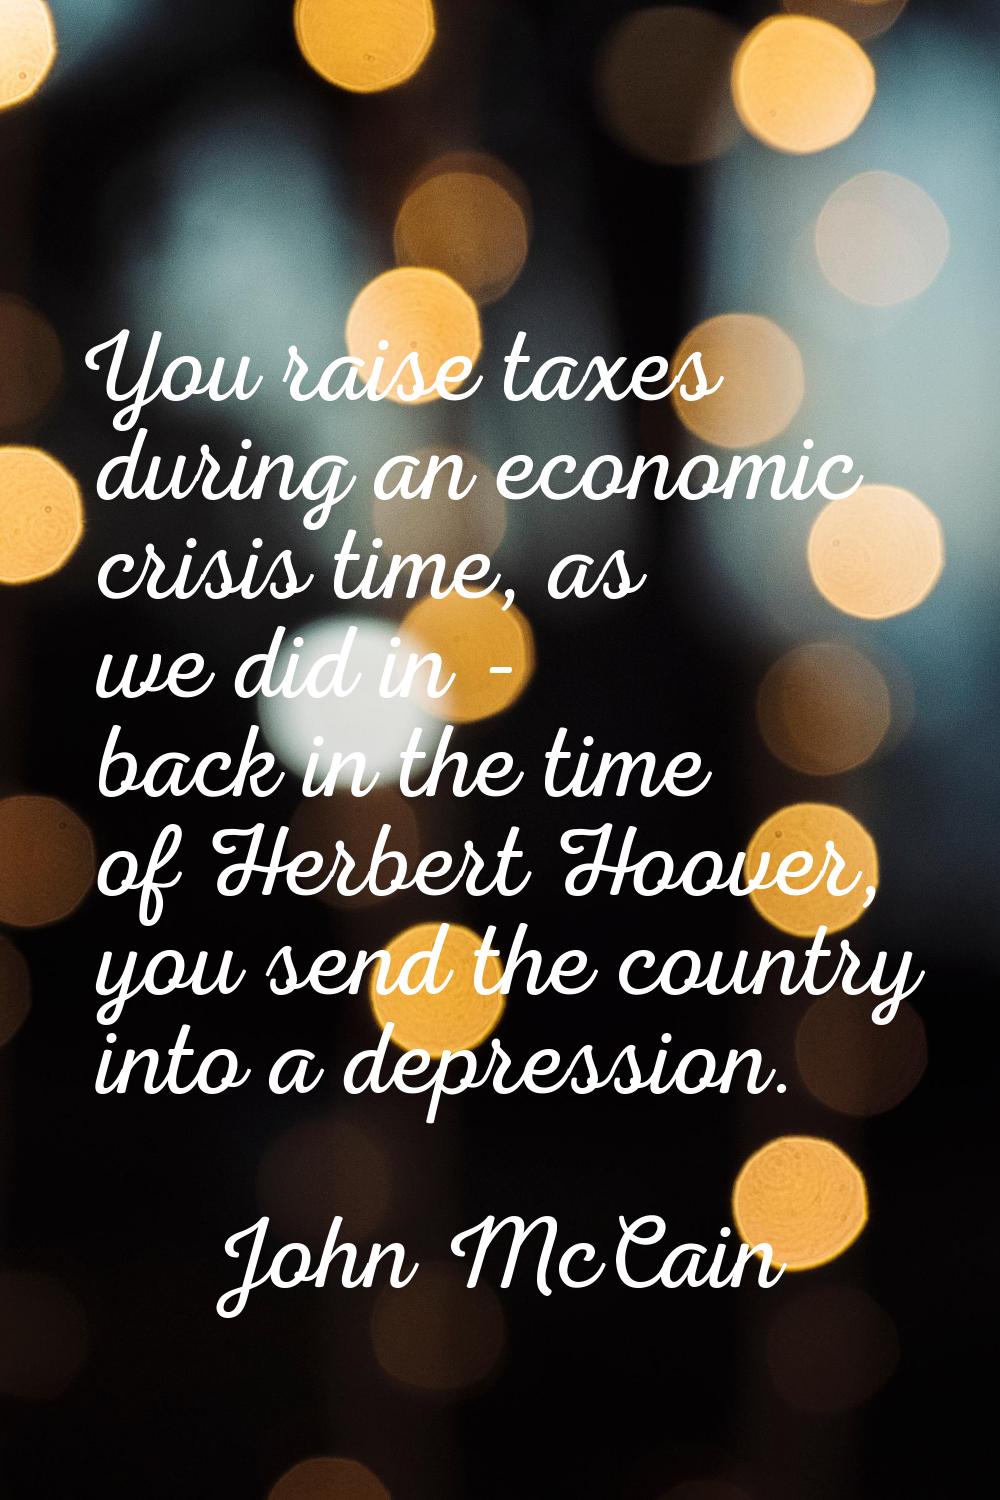 You raise taxes during an economic crisis time, as we did in - back in the time of Herbert Hoover, 